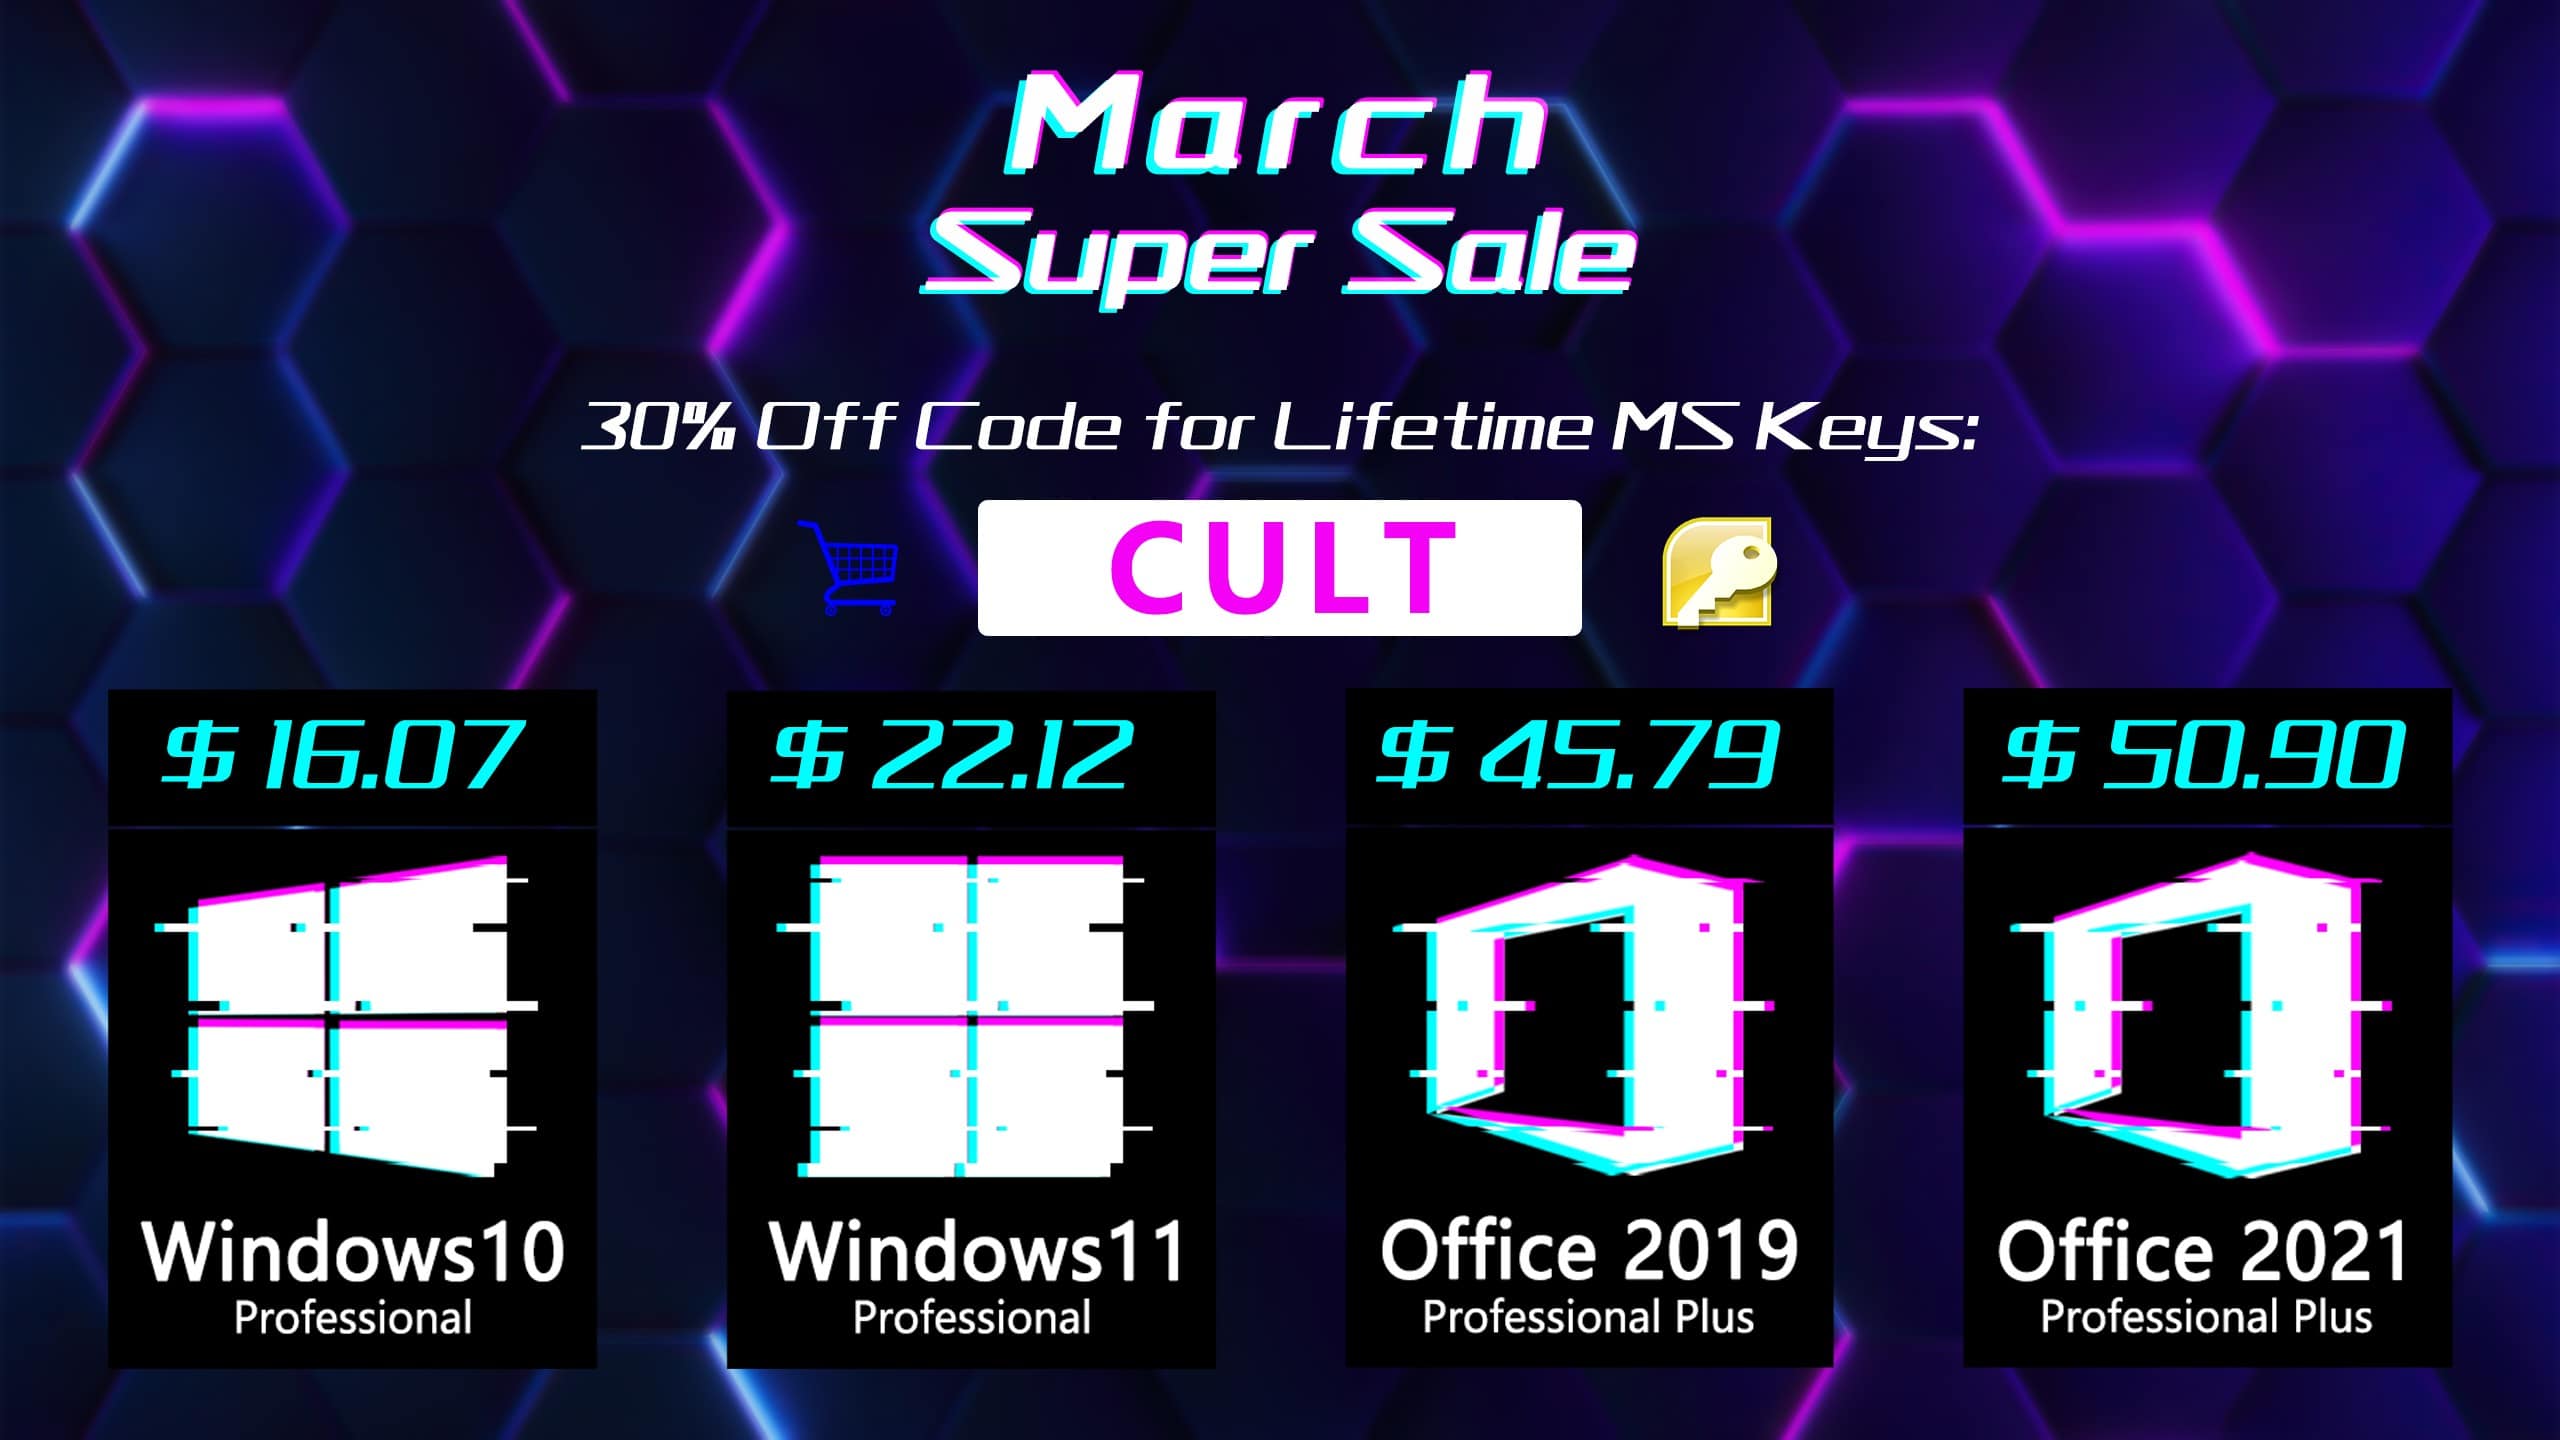 In CDKeylord's Super Sale, you can get 30% off with coupon code CULT.